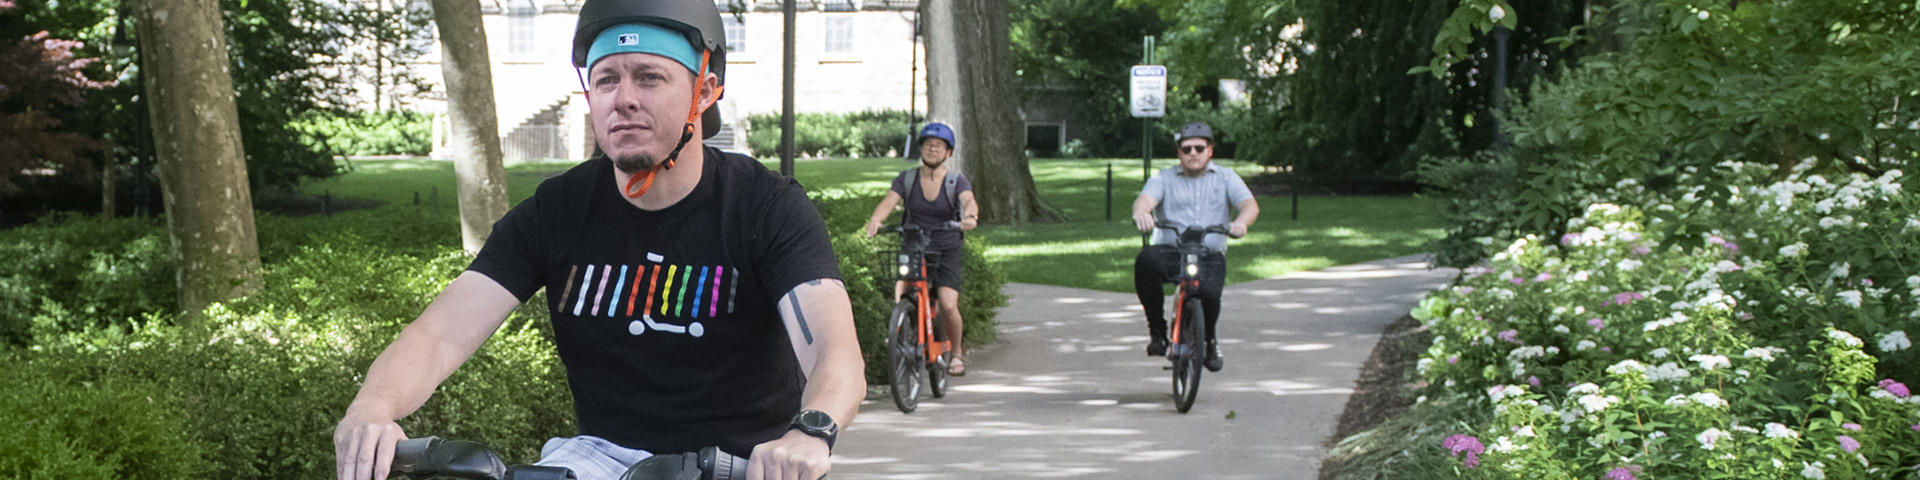 Penn Staters riding Spin e-bikes on campus.